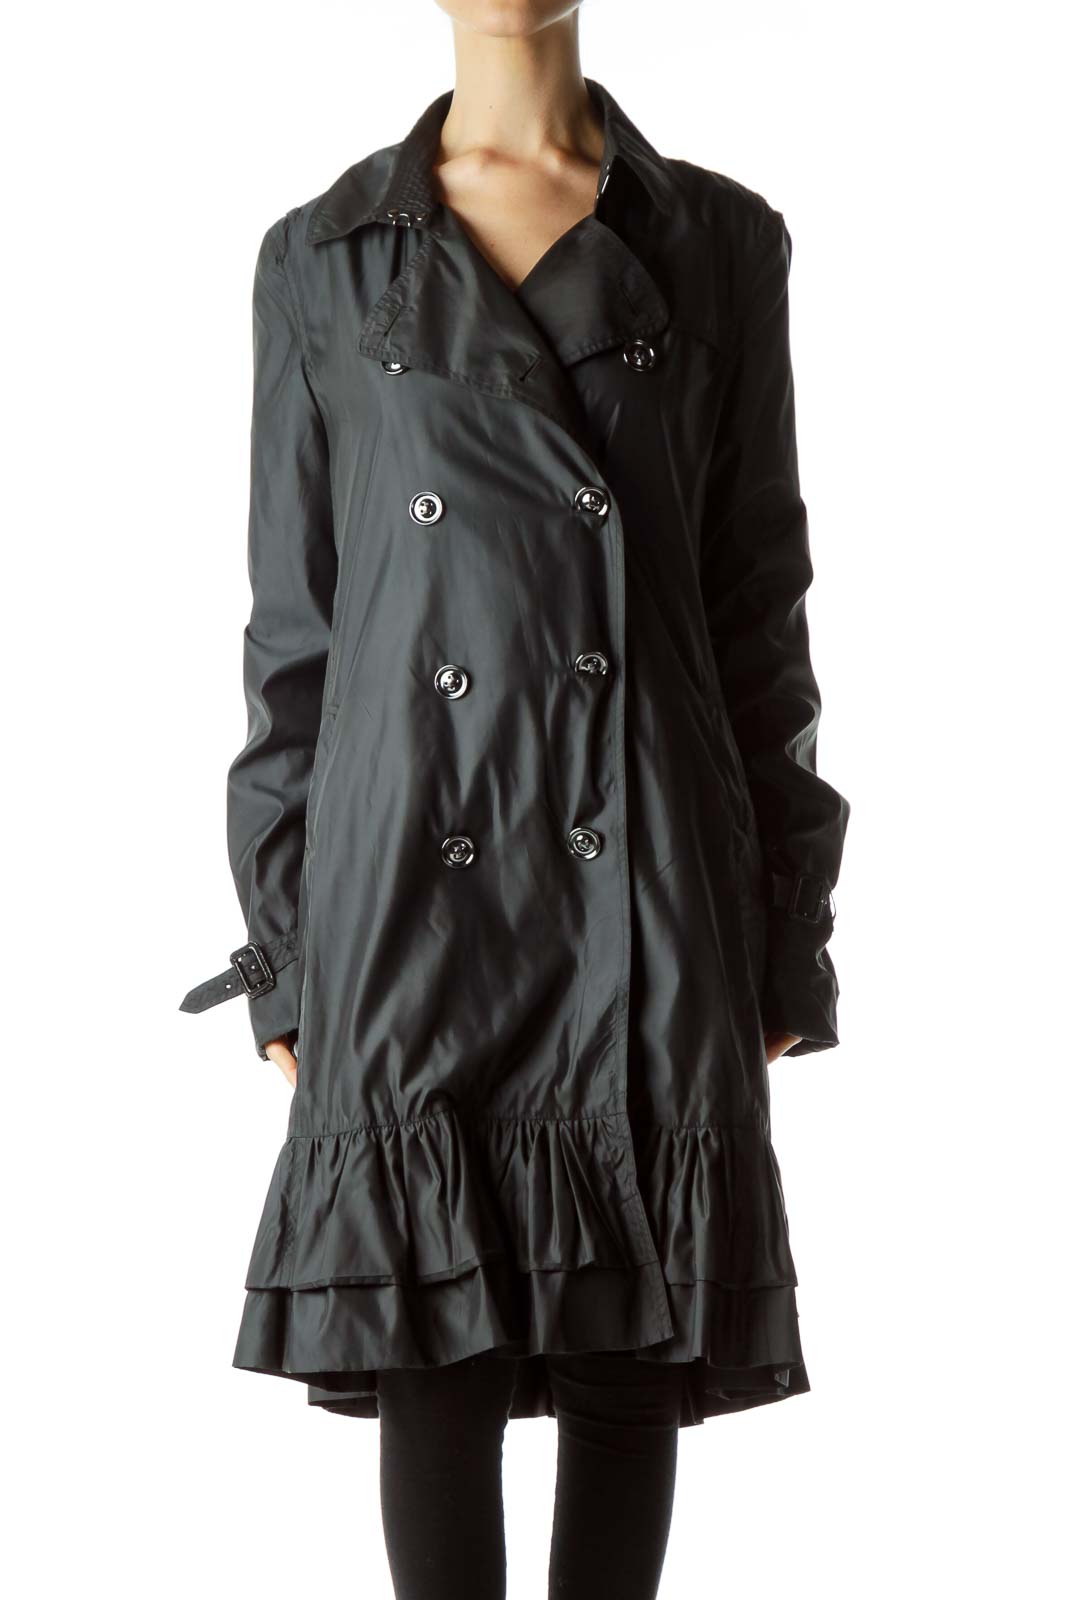 SilkRoll - Black Long Single Breasted Trench Coat Polyester Spandex ...